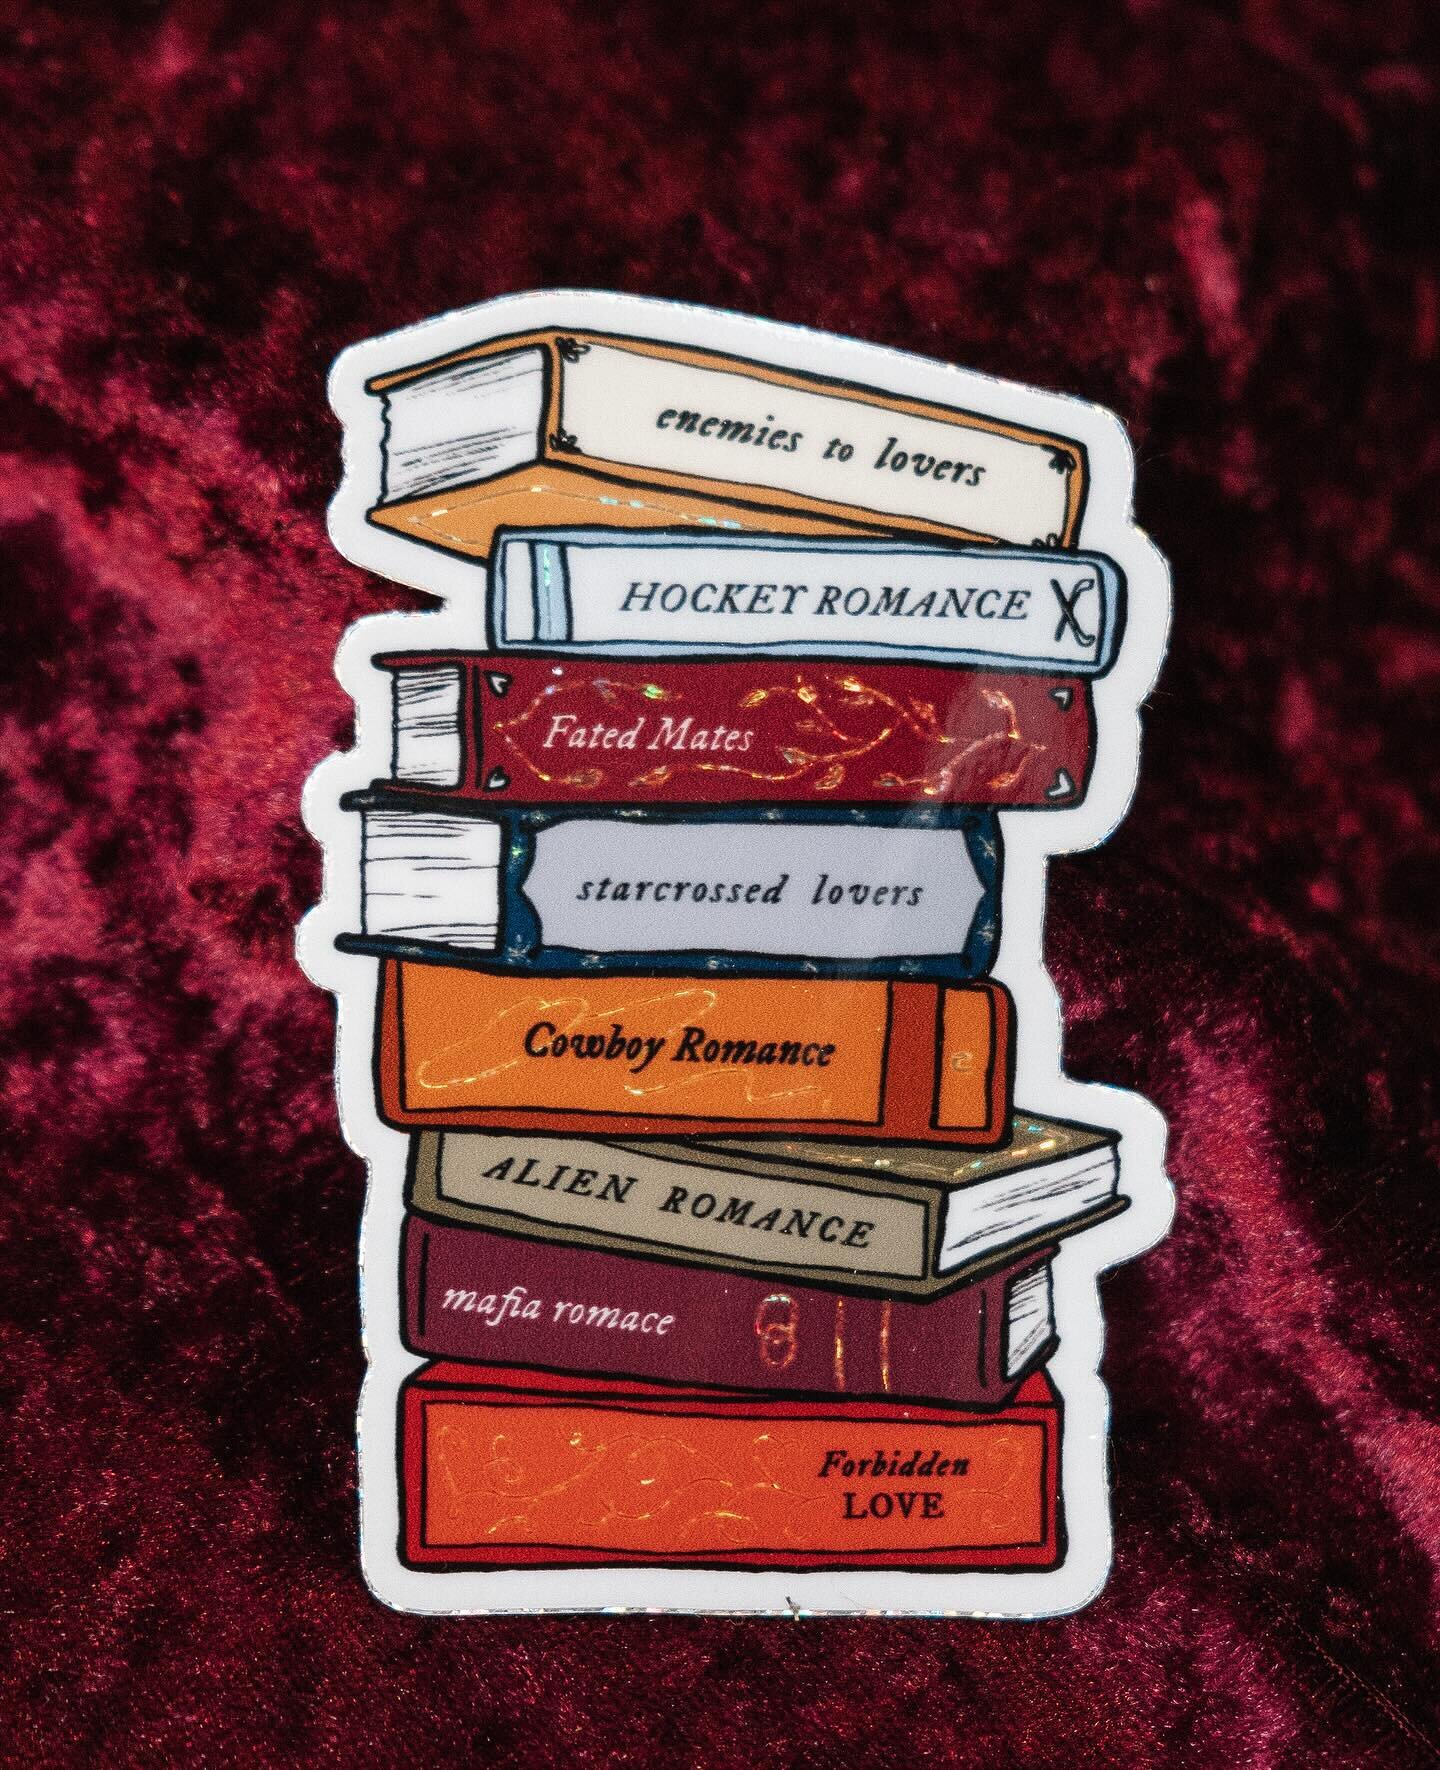 In case you missed it, we designed a new book stack sticker for all of you e- reader and water bottle fiends! 😻✨💕 which is your favorite out of the stack? 

#capuletbooks #bookstack #bookstickers